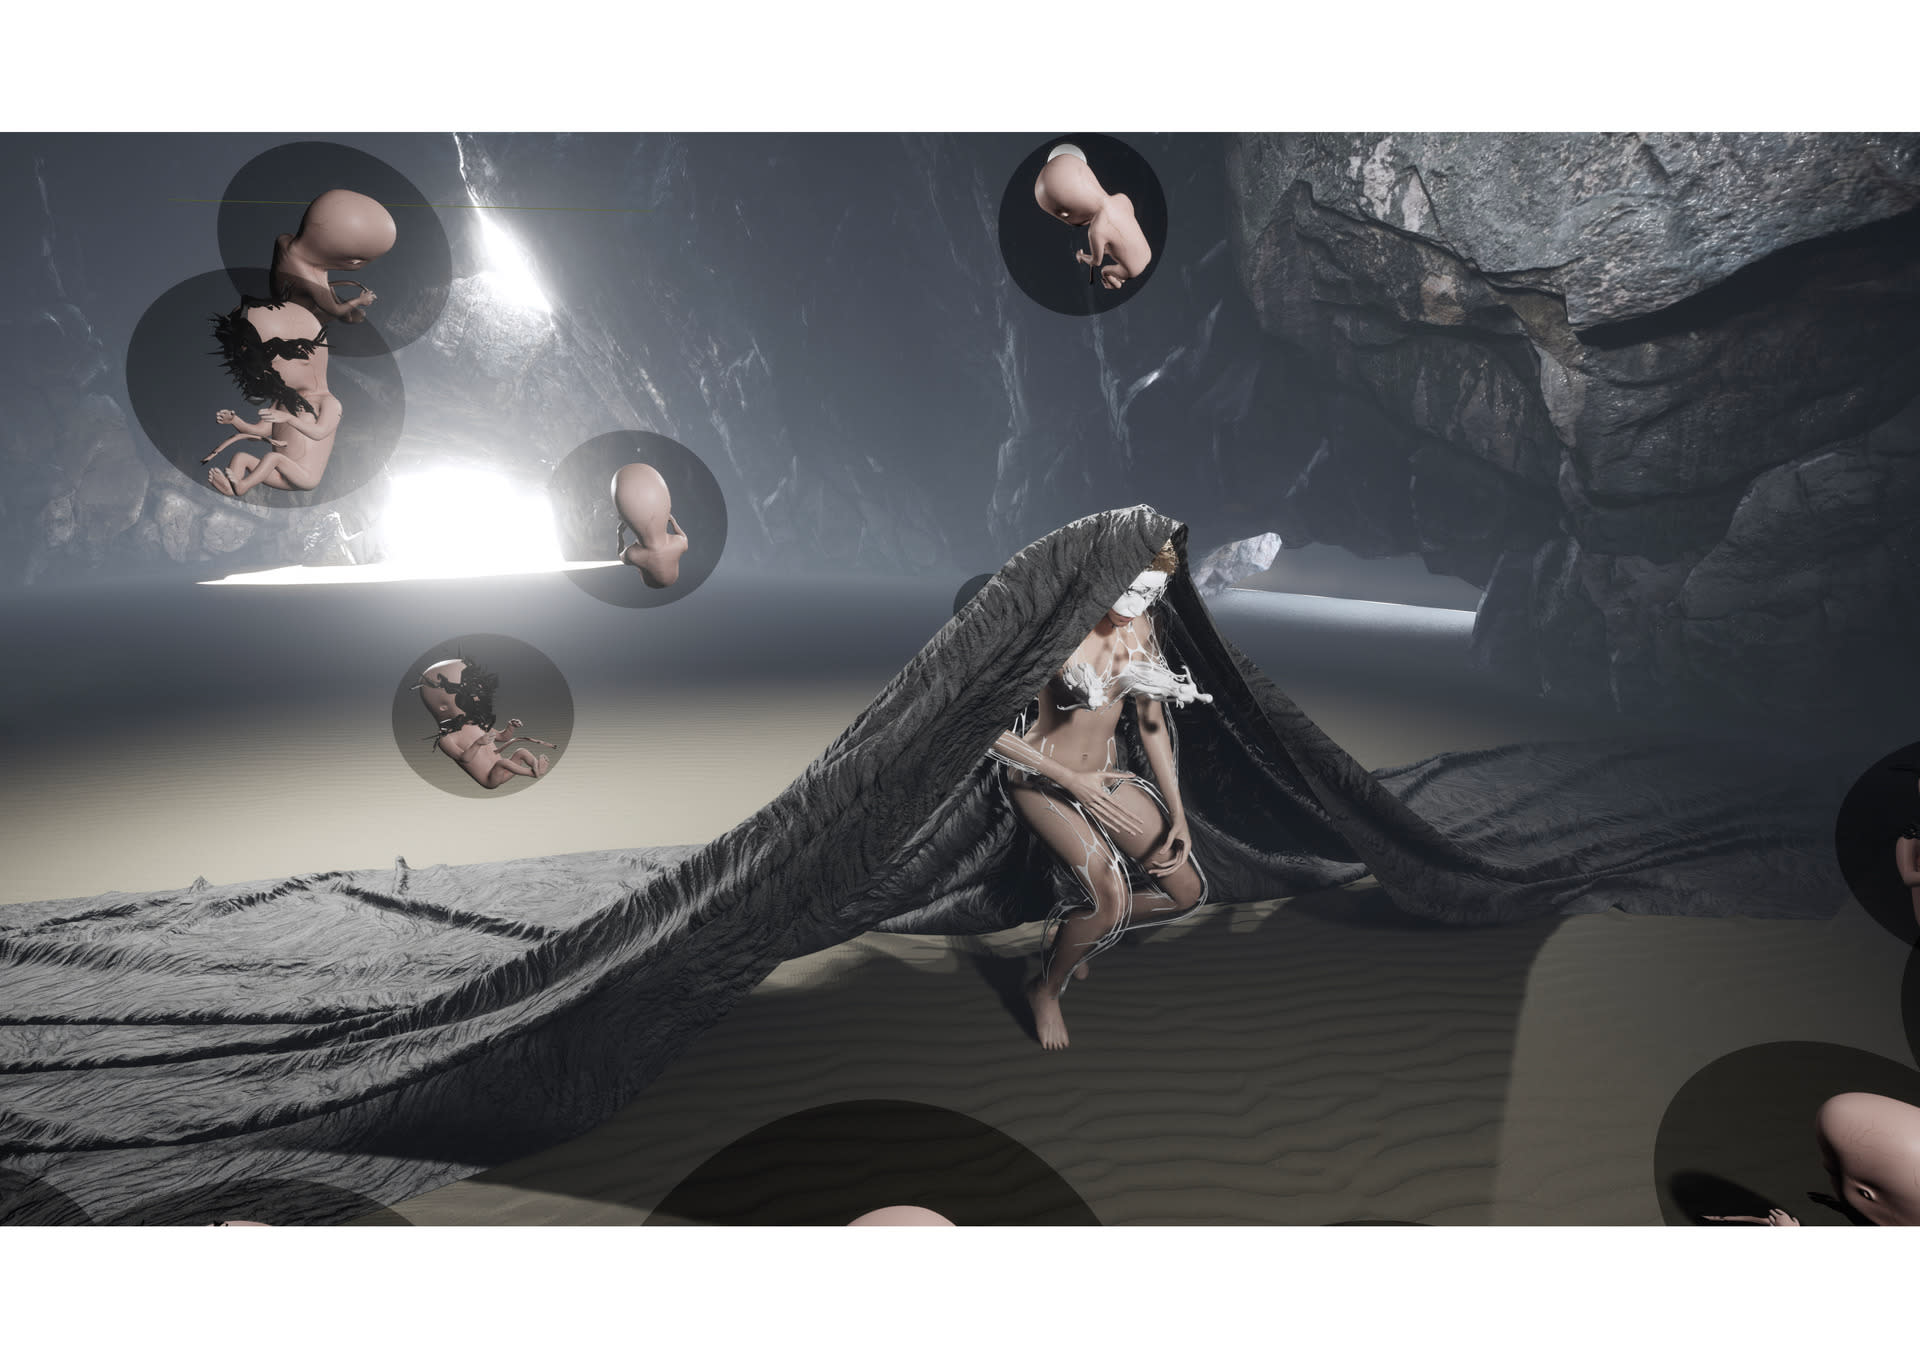 Image of a mannequin-like figure in a cave, bent over and partially covered by a large dark cloth which also covers the sandy-looking ground. Bubbles containing foetus-like figures float above.